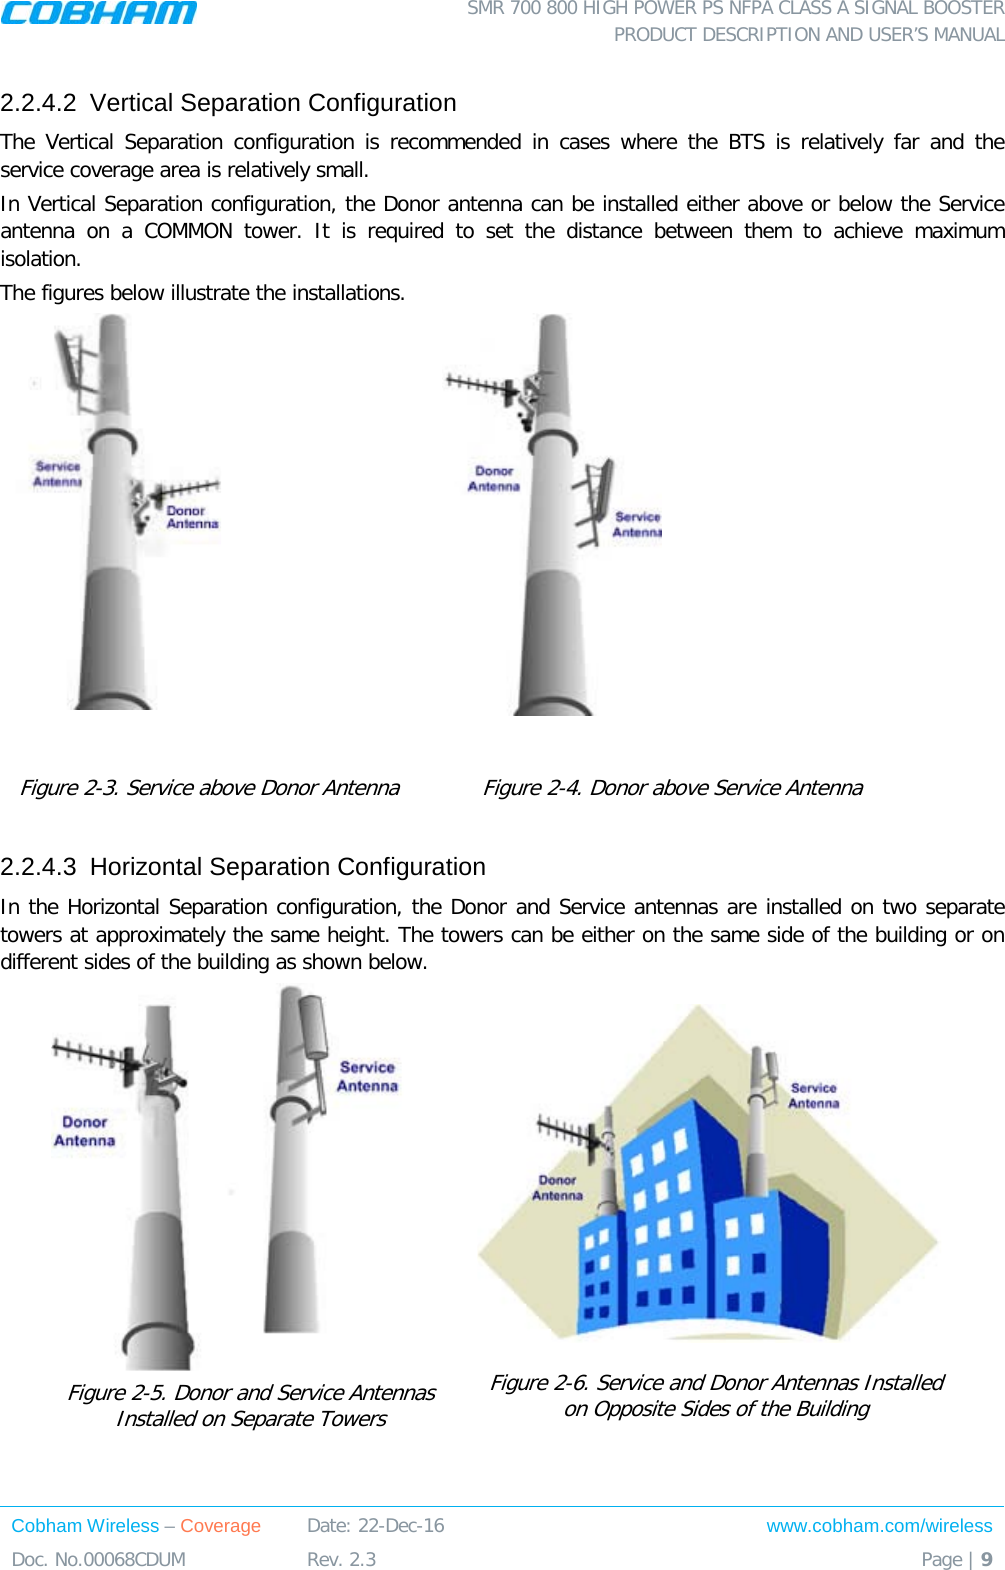  SMR 700 800 HIGH POWER PS NFPA CLASS A SIGNAL BOOSTER  PRODUCT DESCRIPTION AND USER’S MANUAL Cobham Wireless – Coverage Date: 22-Dec-16 www.cobham.com/wireless Doc. No.00068CDUM  Rev. 2.3  Page | 9  2.2.4.2  Vertical Separation Configuration The Vertical Separation configuration is recommended in cases where the BTS is relatively far and the service coverage area is relatively small. In Vertical Separation configuration, the Donor antenna can be installed either above or below the Service antenna on a COMMON tower. It is required to set the distance between them to achieve maximum isolation.  The figures below illustrate the installations.    Figure  2-3. Service above Donor Antenna Figure  2-4. Donor above Service Antenna 2.2.4.3  Horizontal Separation Configuration  In the Horizontal Separation configuration, the Donor and Service antennas are installed on two separate towers at approximately the same height. The towers can be either on the same side of the building or on different sides of the building as shown below.  Figure  2-5. Donor and Service Antennas Installed on Separate Towers    Figure  2-6. Service and Donor Antennas Installed on Opposite Sides of the Building  